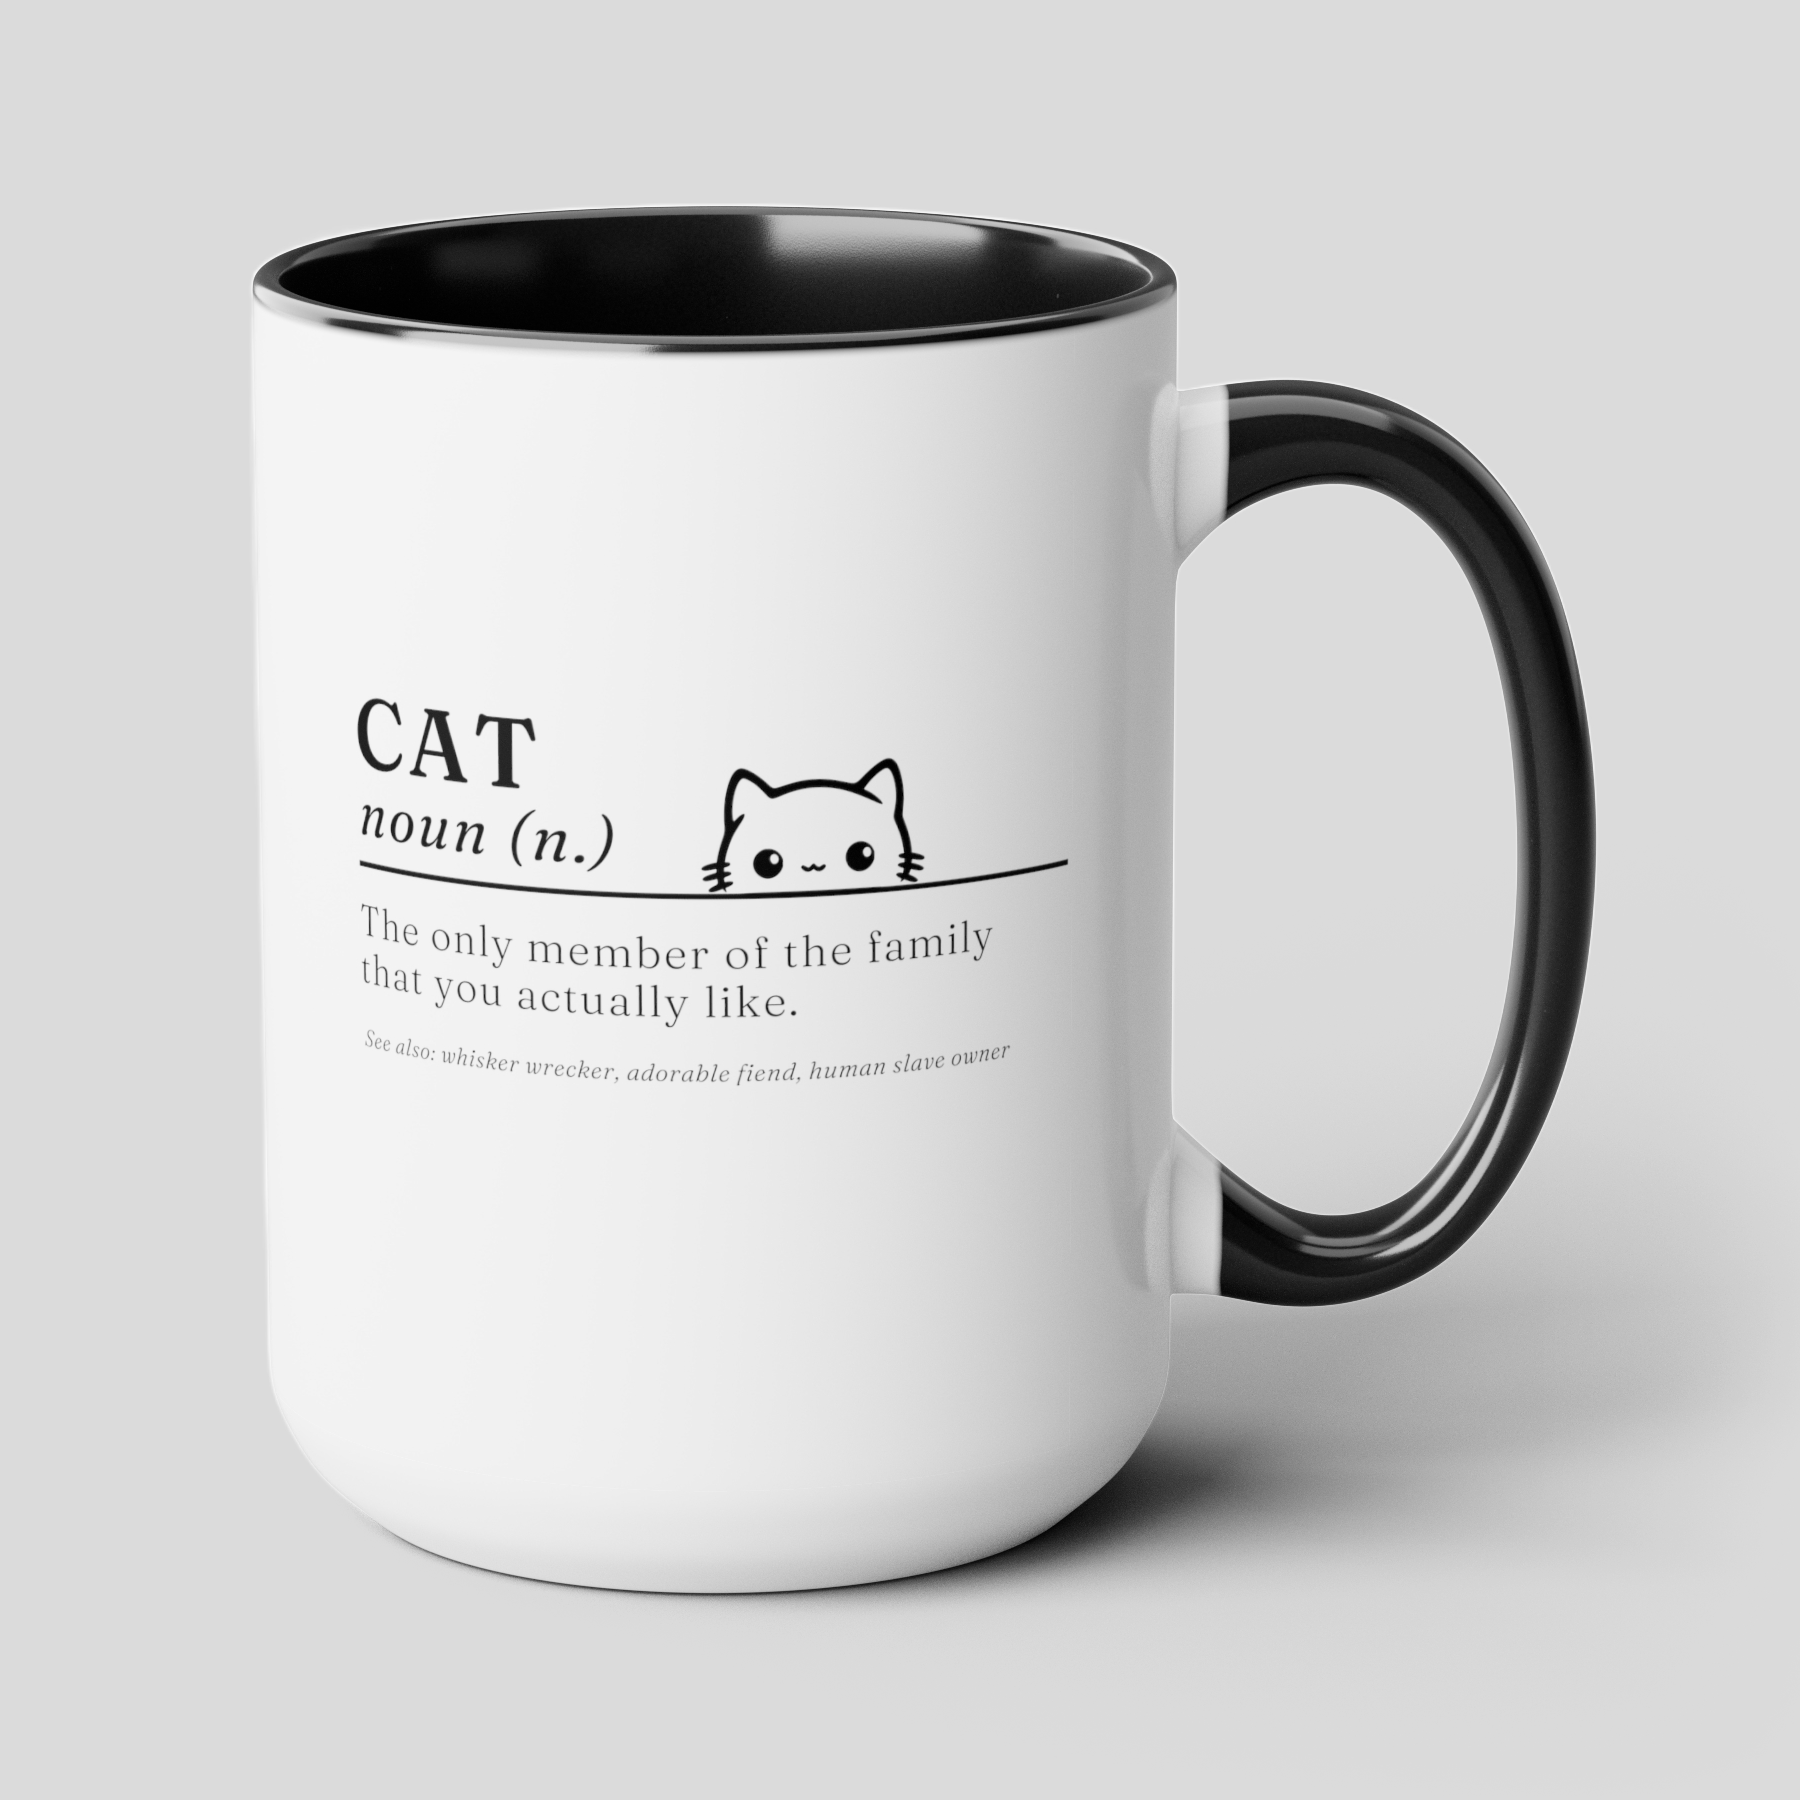 Pet Cat Definition 15oz white with black accent funny large coffee mug gift for cat lover feline her him housewarming meaning friend birthday waveywares wavey wares wavywares wavy wares cover